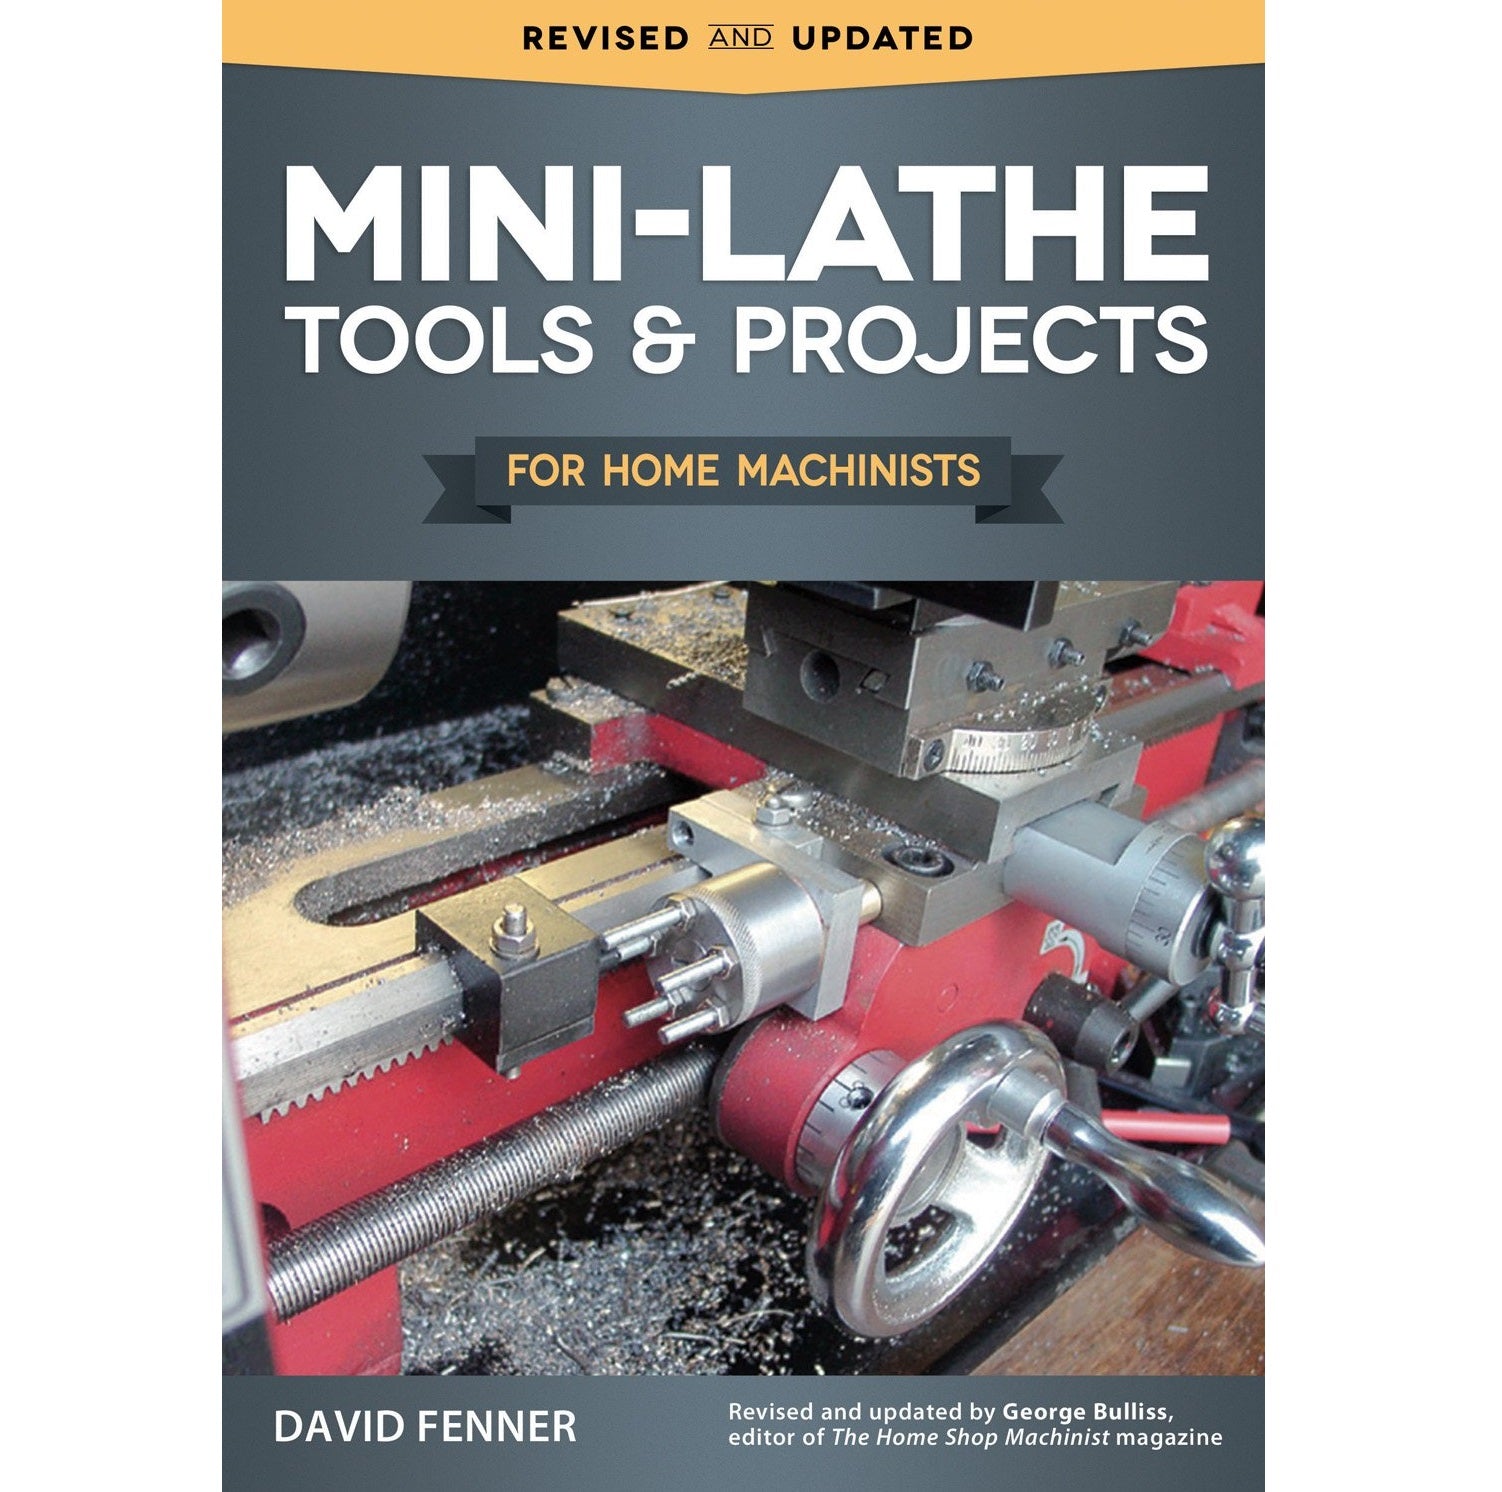 Mini - Lathe Tools and Projects for Home Machinists Book, by David Fenner - Micro - Mark Books